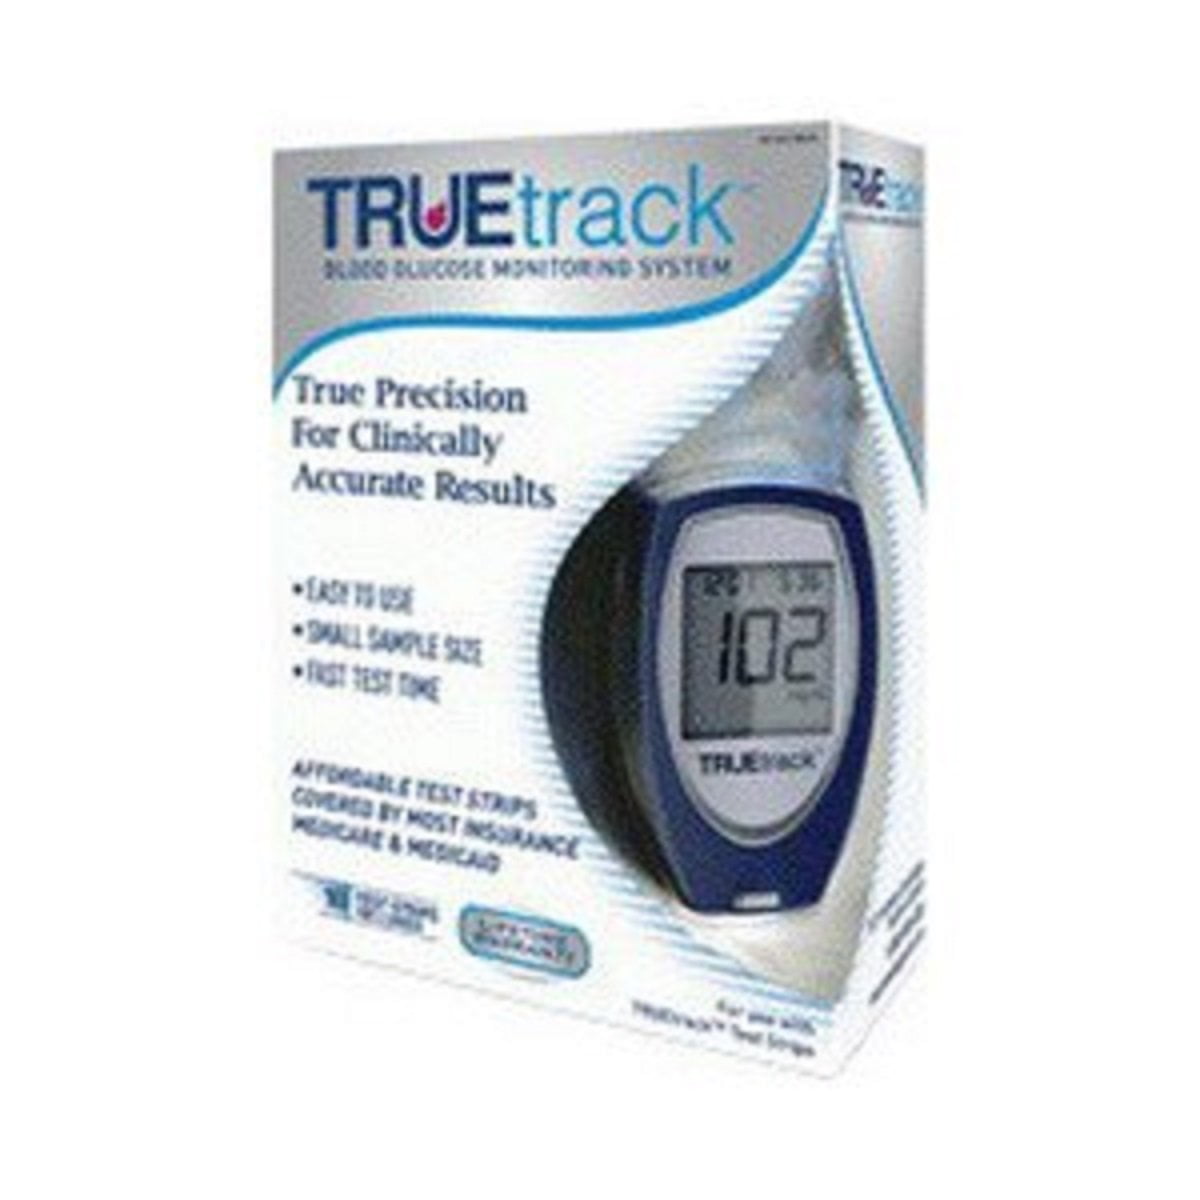 Glucose monitoring Systems erius Maquet. True track